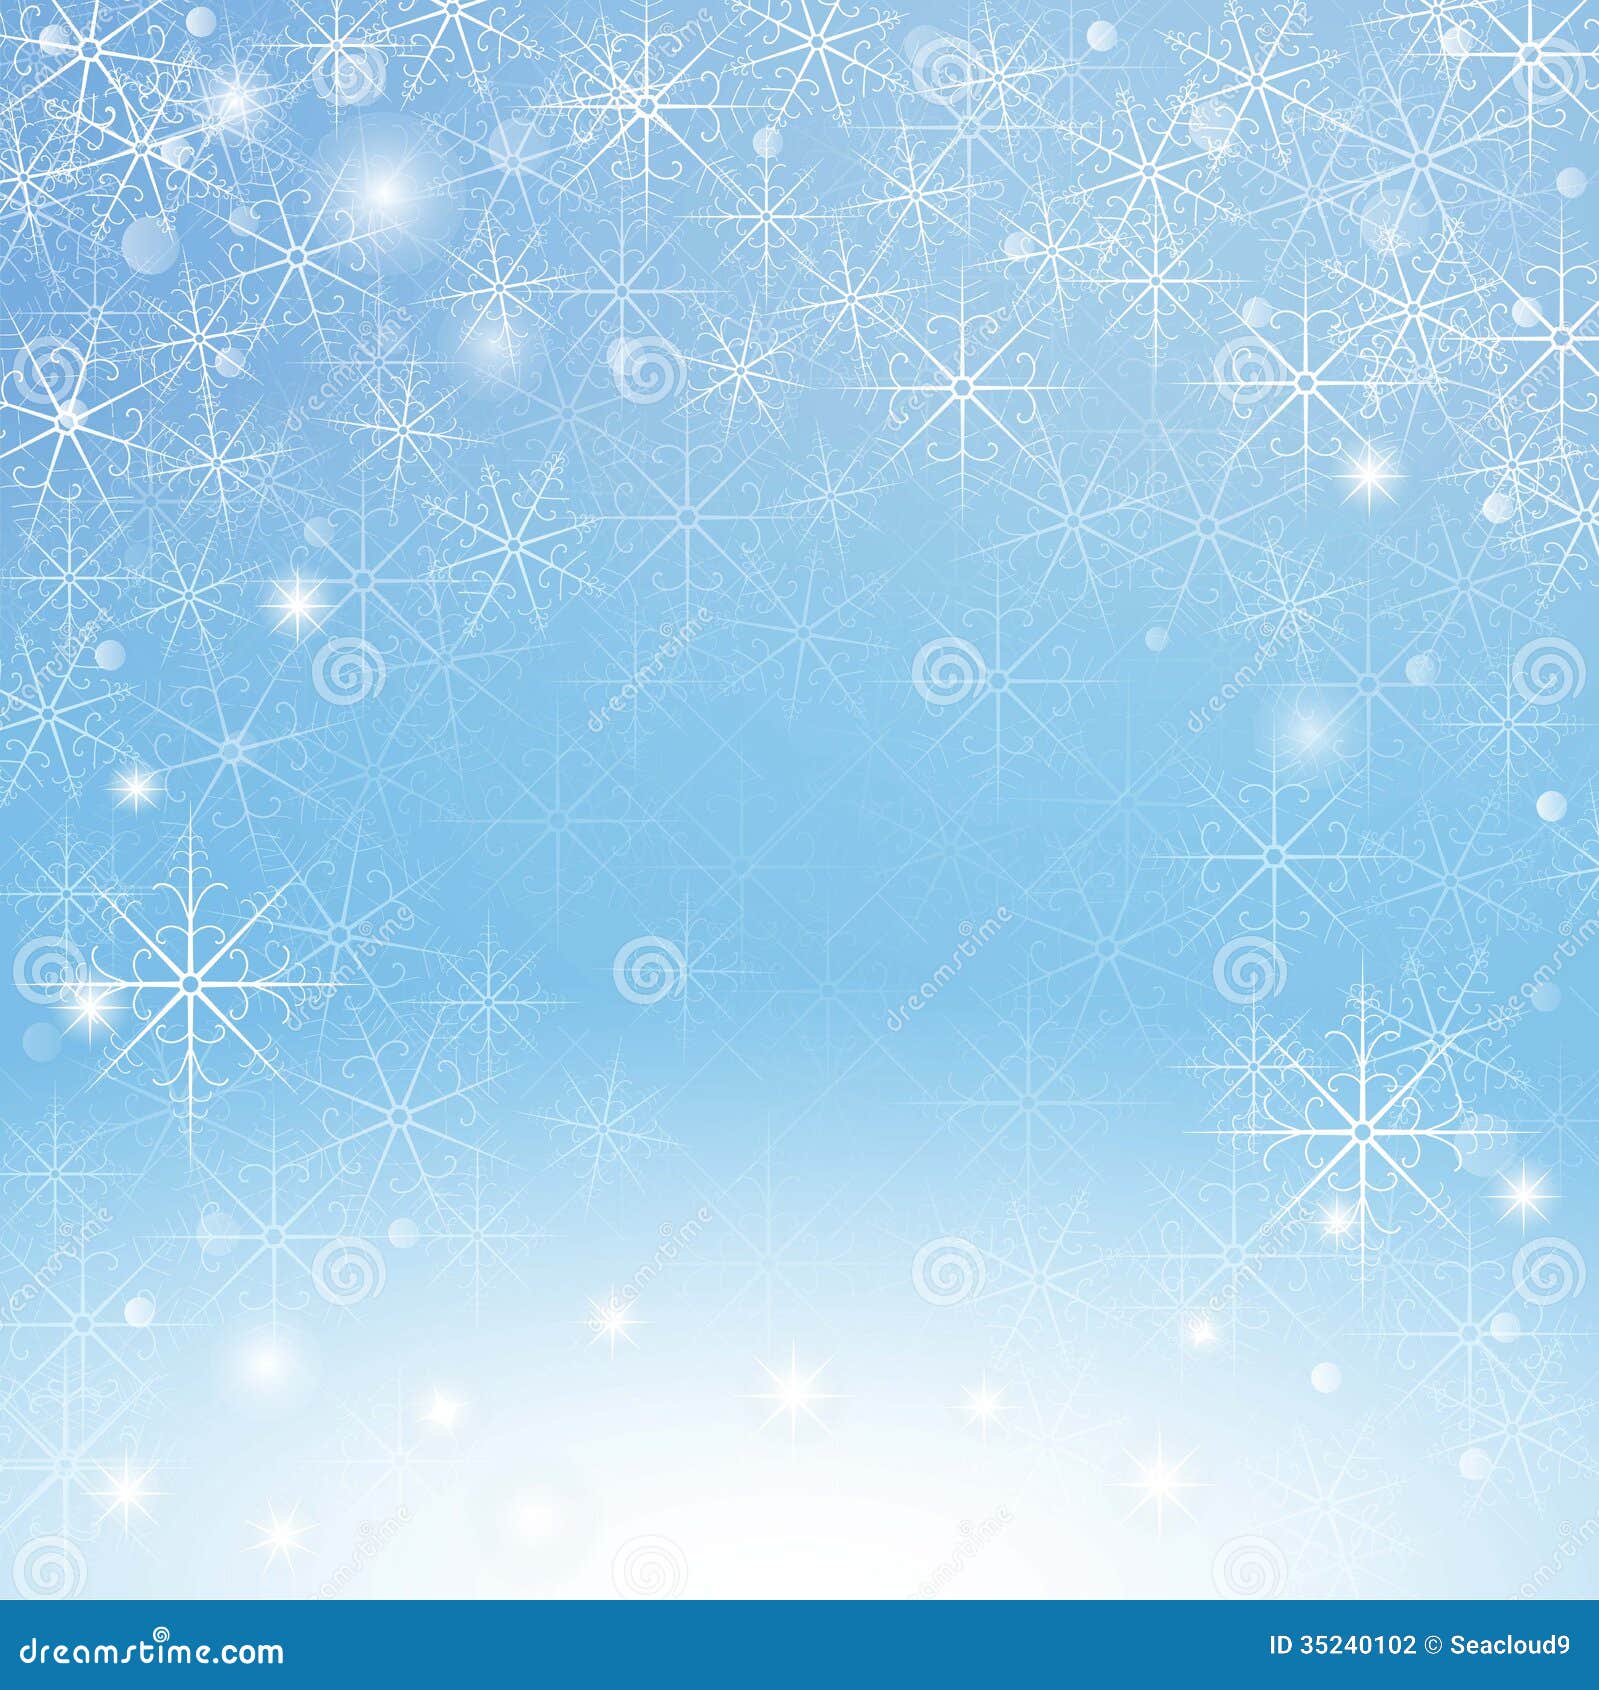 free clipart winter background - photo #12